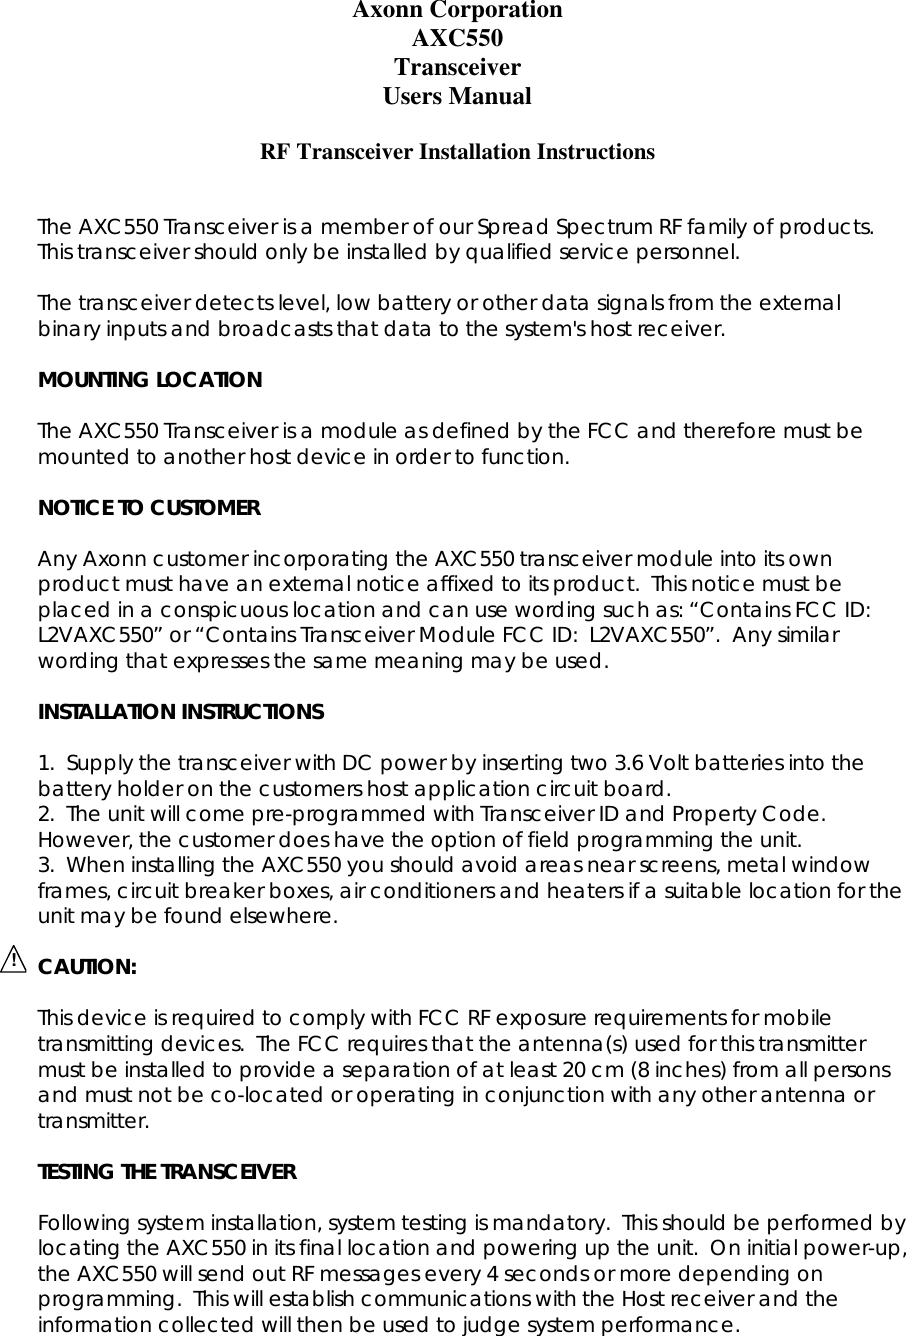   !Axonn Corporation AXC550 Transceiver Users Manual  RF Transceiver Installation Instructions   The AXC550 Transceiver is a member of our Spread Spectrum RF family of products.  This transceiver should only be installed by qualified service personnel.  The transceiver detects level, low battery or other data signals from the external binary inputs and broadcasts that data to the system&apos;s host receiver.  MOUNTING LOCATION  The AXC550 Transceiver is a module as defined by the FCC and therefore must be mounted to another host device in order to function.  NOTICE TO CUSTOMER  Any Axonn customer incorporating the AXC550 transceiver module into its own product must have an external notice affixed to its product.  This notice must be placed in a conspicuous location and can use wording such as: “Contains FCC ID:  L2VAXC550” or “Contains Transceiver Module FCC ID:  L2VAXC550”.  Any similar wording that expresses the same meaning may be used.  INSTALLATION INSTRUCTIONS  1.  Supply the transceiver with DC power by inserting two 3.6 Volt batteries into the battery holder on the customers host application circuit board. 2.  The unit will come pre-programmed with Transceiver ID and Property Code.  However, the customer does have the option of field programming the unit. 3.  When installing the AXC550 you should avoid areas near screens, metal window frames, circuit breaker boxes, air conditioners and heaters if a suitable location for the unit may be found elsewhere.  CAUTION:  This device is required to comply with FCC RF exposure requirements for mobile transmitting devices.  The FCC requires that the antenna(s) used for this transmitter must be installed to provide a separation of at least 20 cm (8 inches) from all persons and must not be co-located or operating in conjunction with any other antenna or transmitter.   TESTING THE TRANSCEIVER  Following system installation, system testing is mandatory.  This should be performed by locating the AXC550 in its final location and powering up the unit.  On initial power-up, the AXC550 will send out RF messages every 4 seconds or more depending on programming.  This will establish communications with the Host receiver and the information collected will then be used to judge system performance. 